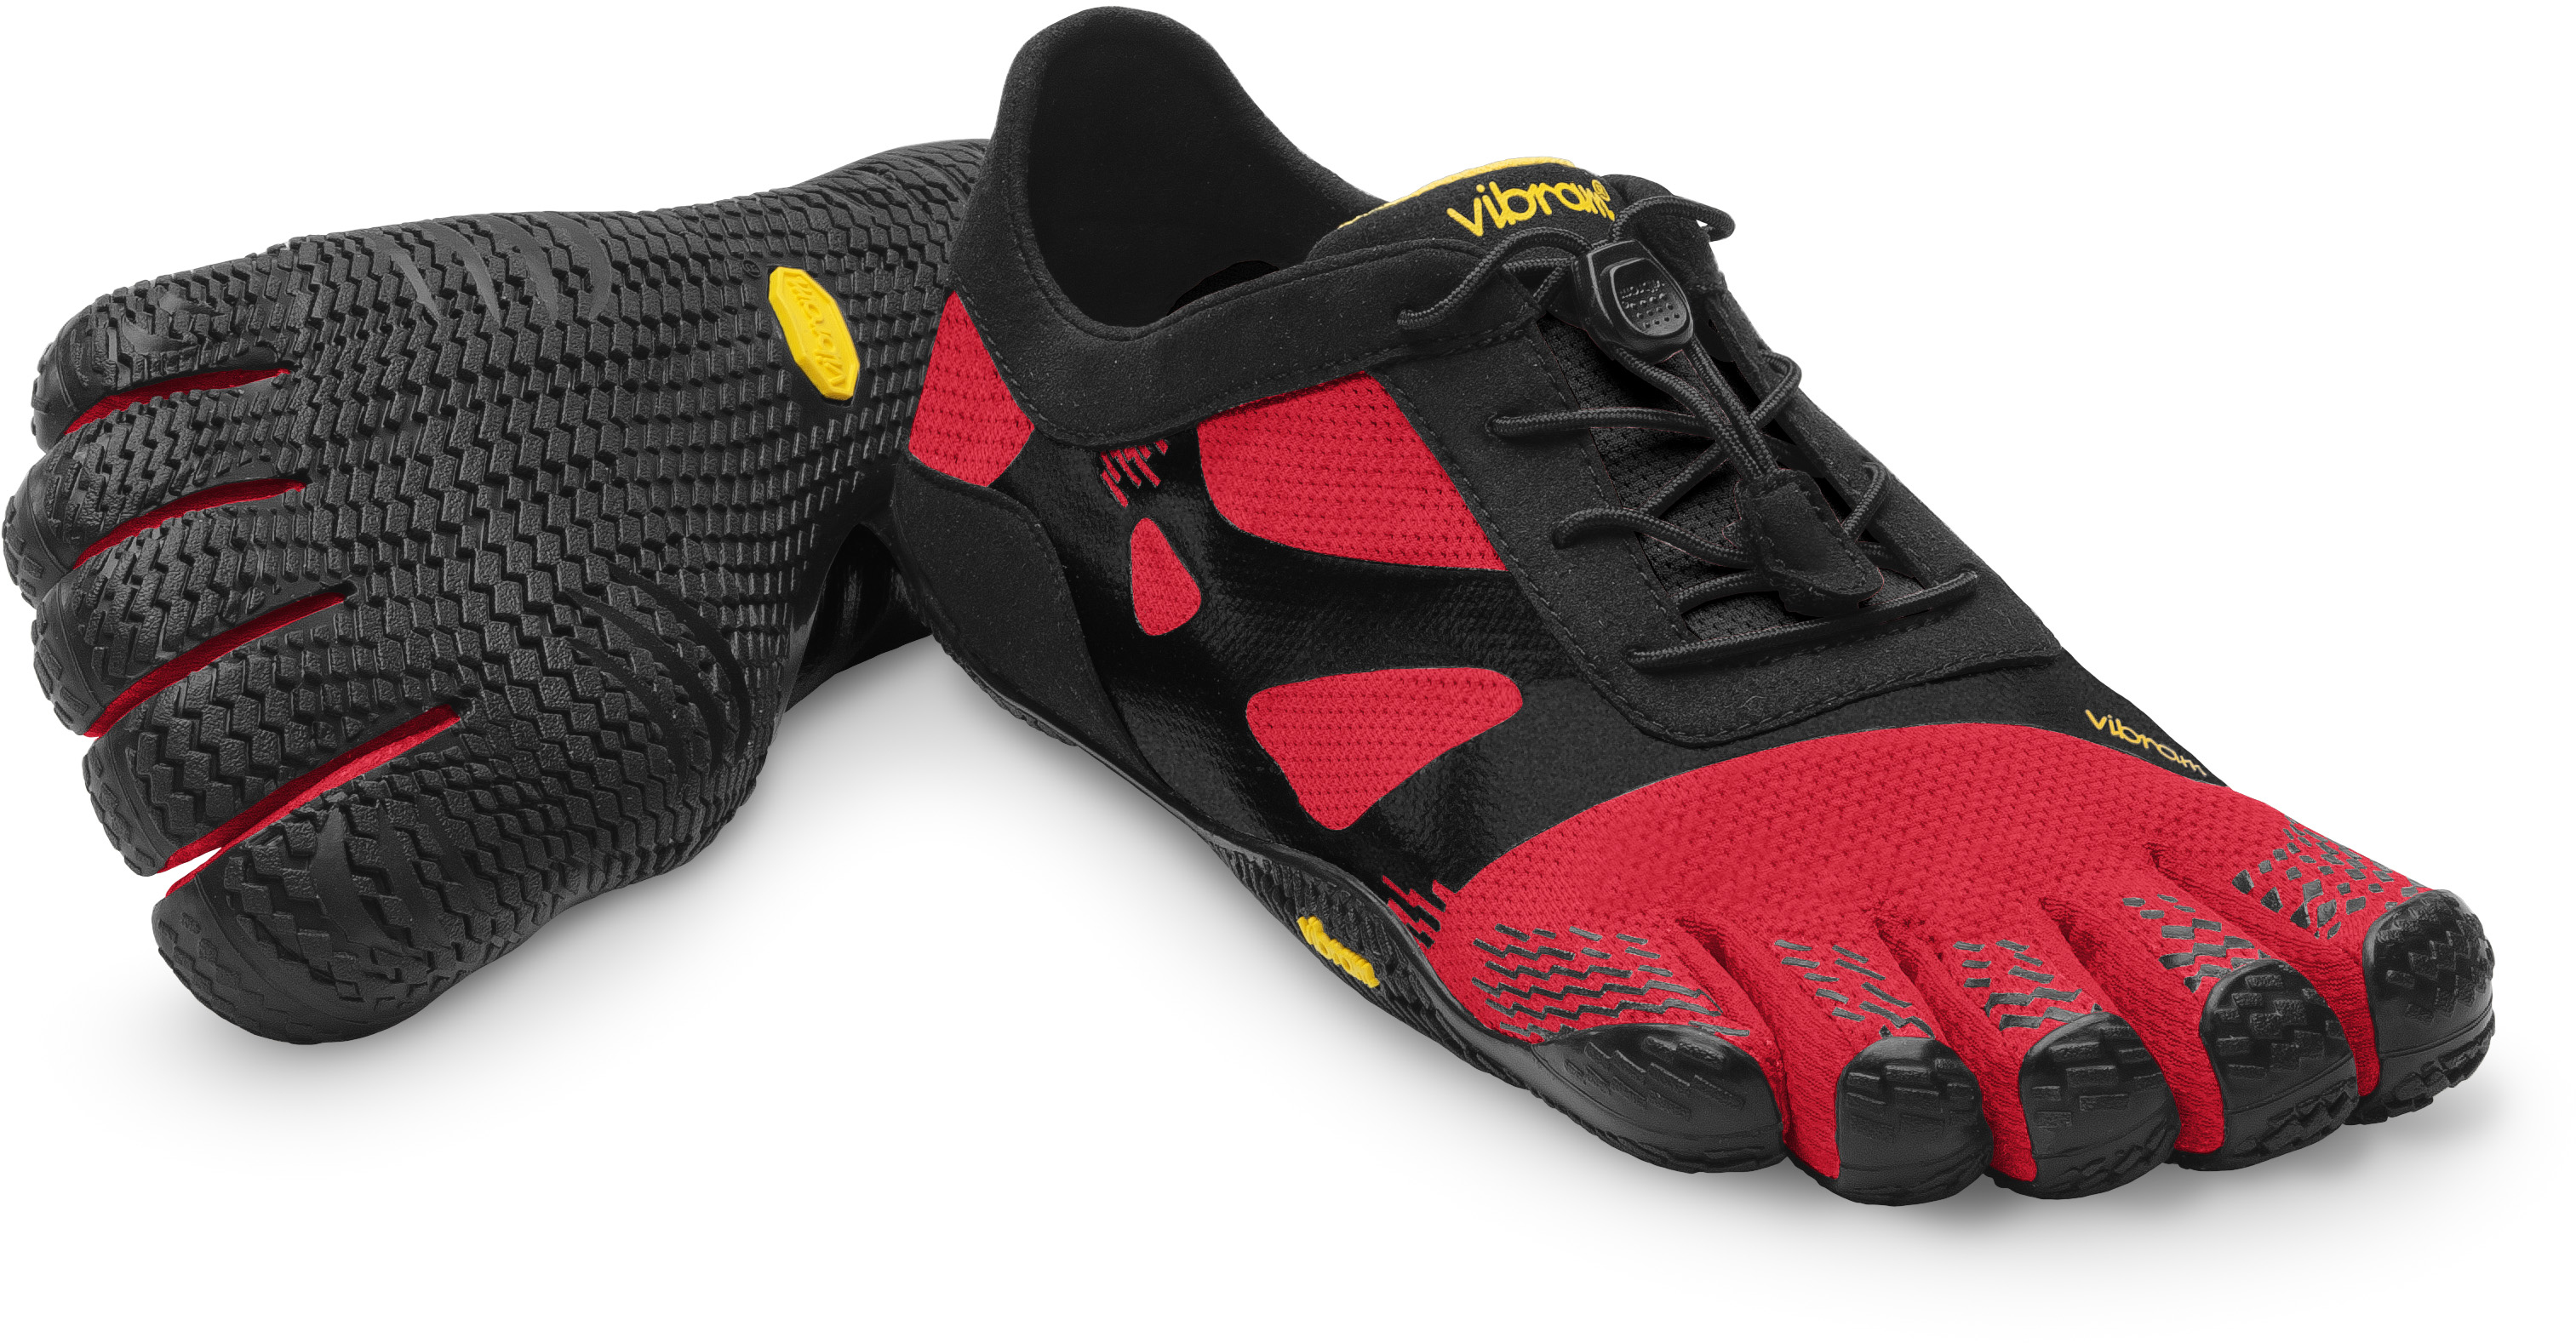 Vibram FiveFingers with NEW colors 